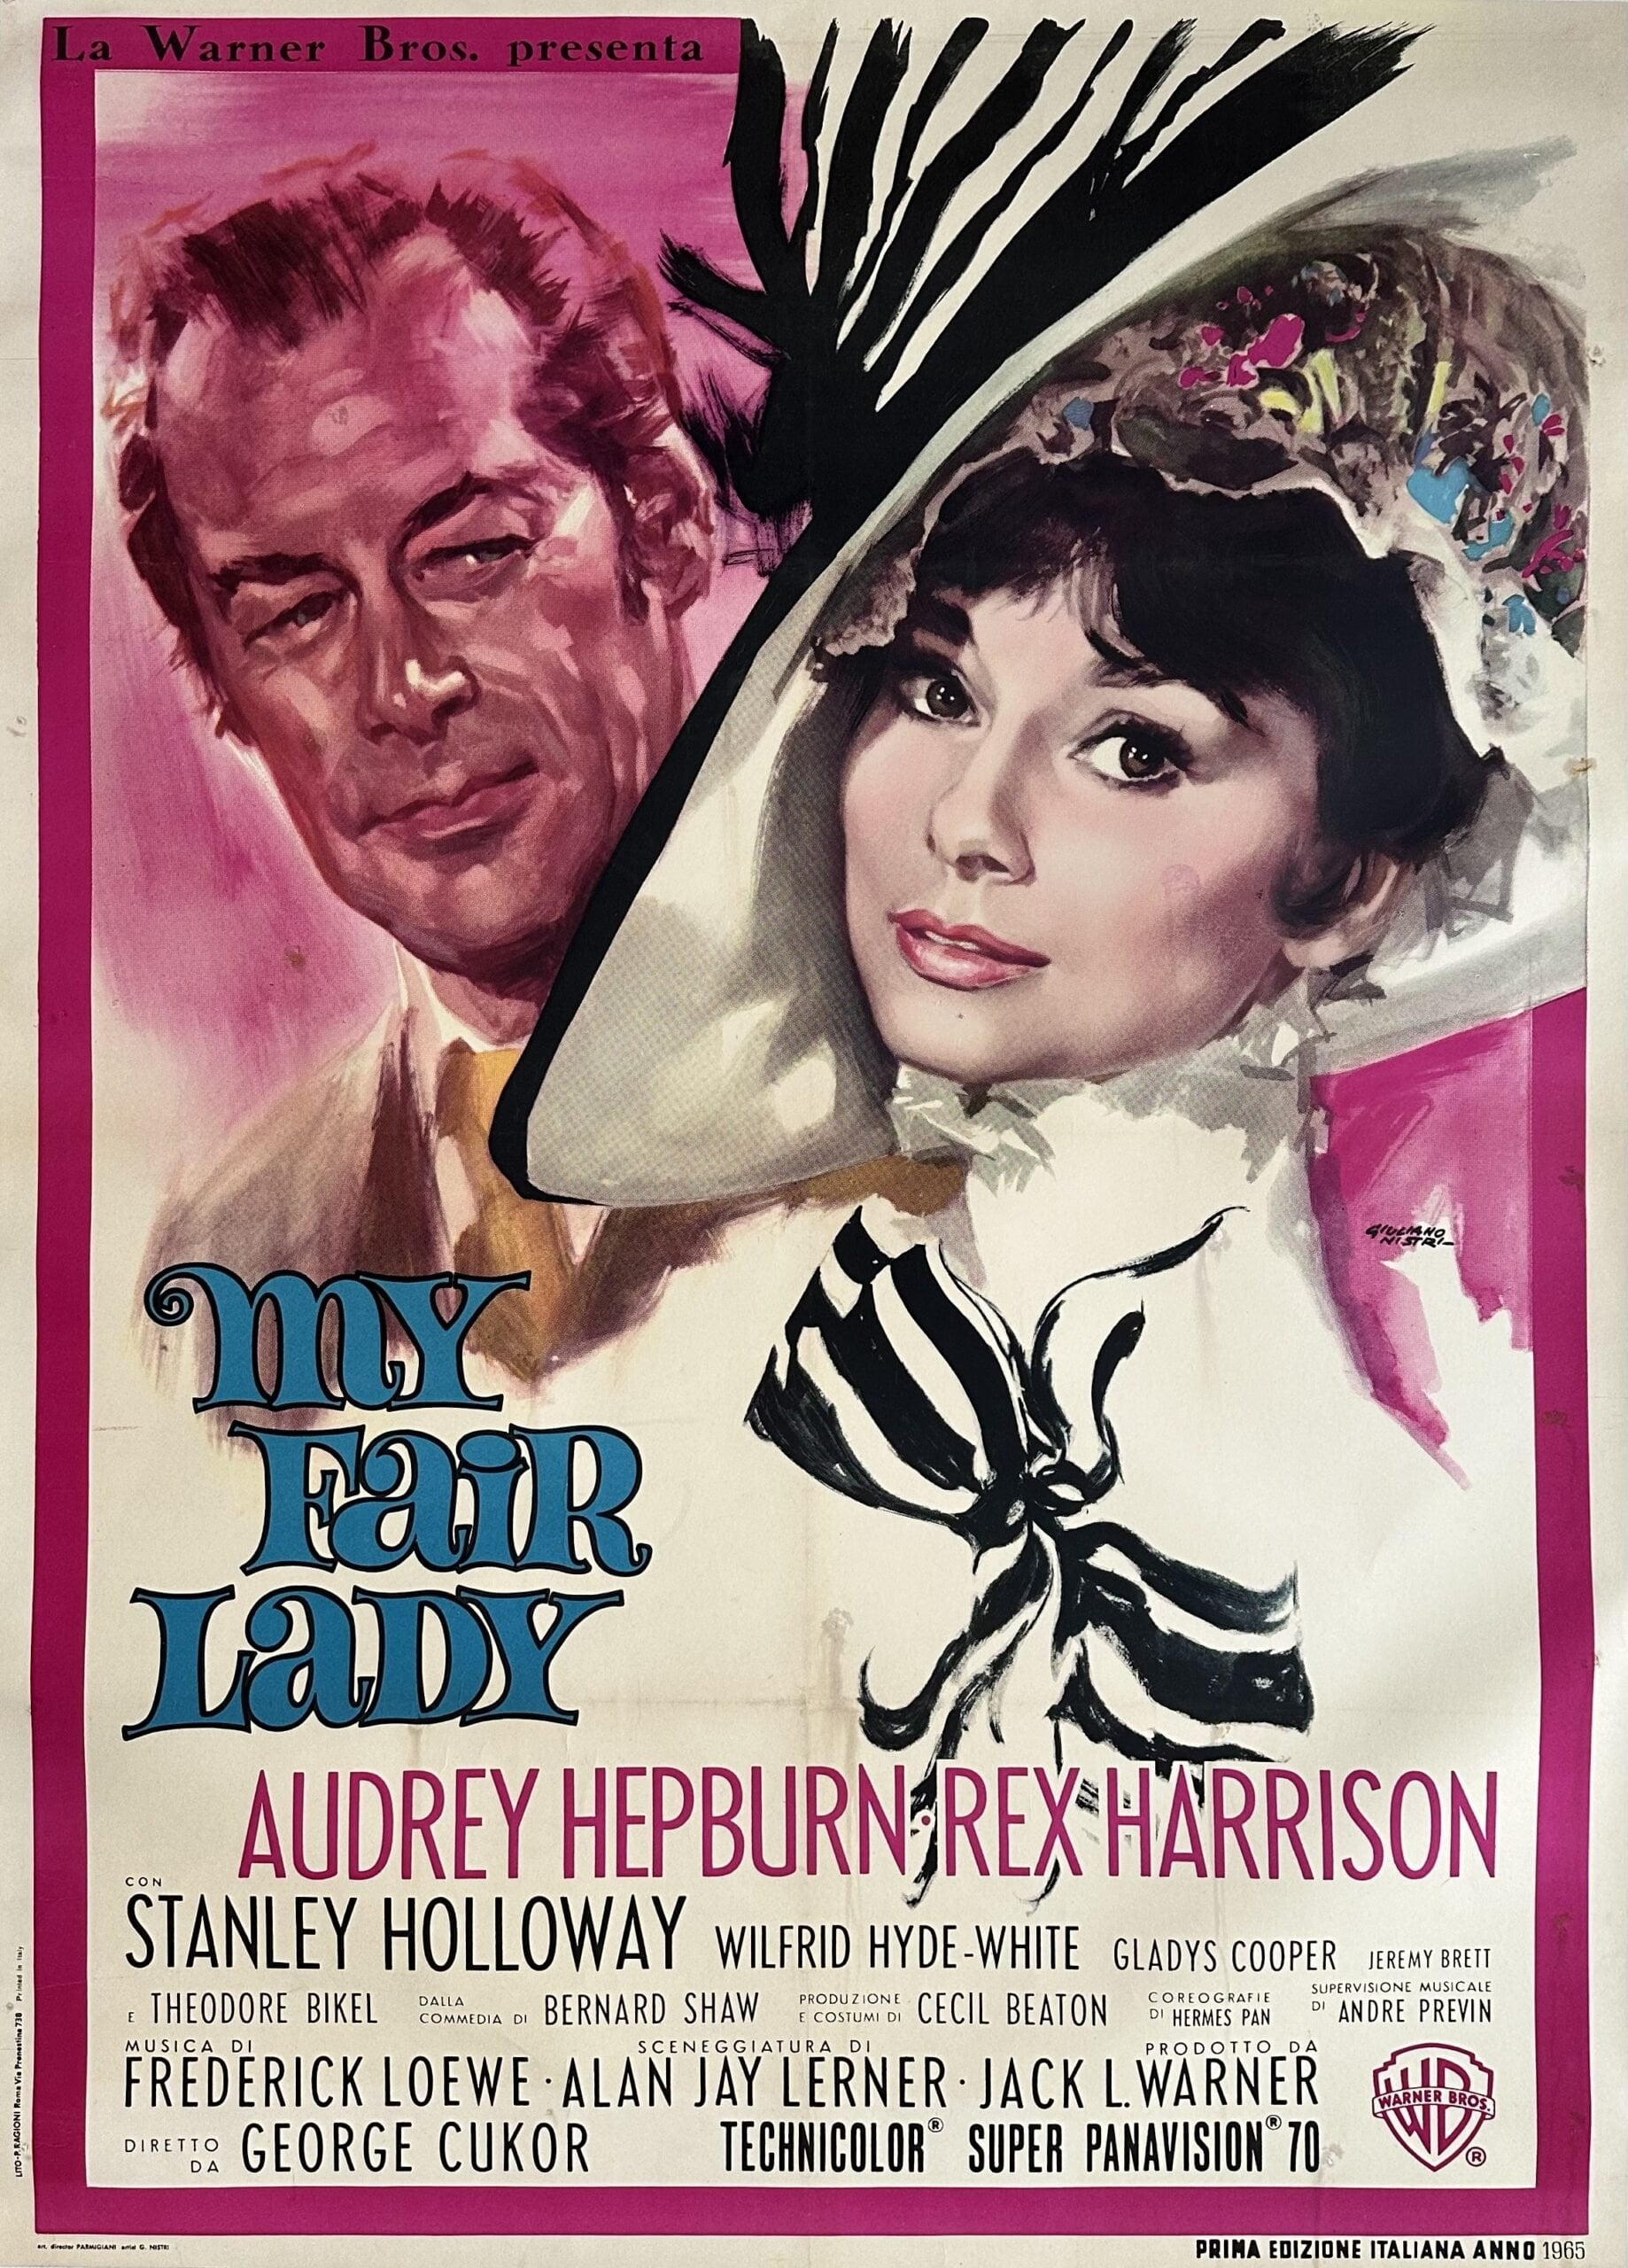 Original vintage cinema movie poster for sale for the musical, My Fair Lady, starring Audrey Hepburn